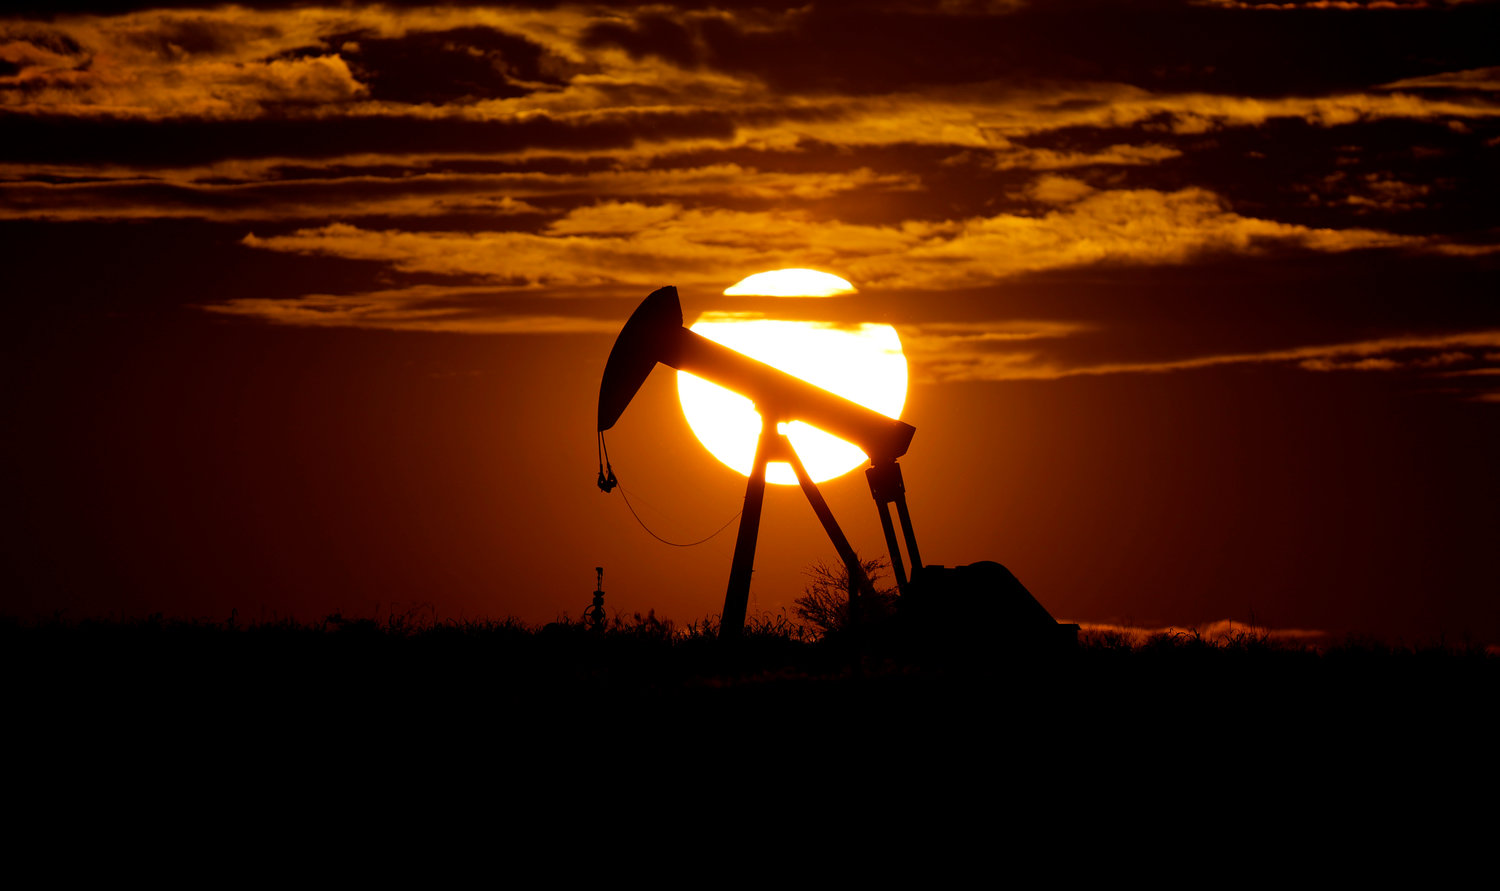 The sun sets behind an idle pump jack near Karnes City, USA, April 8, 2020. Oil prices are sagging amid fears of recessions across the globe. OPEC and allied countries are weighing what to do about that when they meet online Thursday, Sept. 8, 2022. High oil prices were a bonanza for countries like Saudi Arabia over the summer, but now they're well off those highs. Saudi Arabia's oil minister has even said the group known as OPEC+ could cut production at any time.